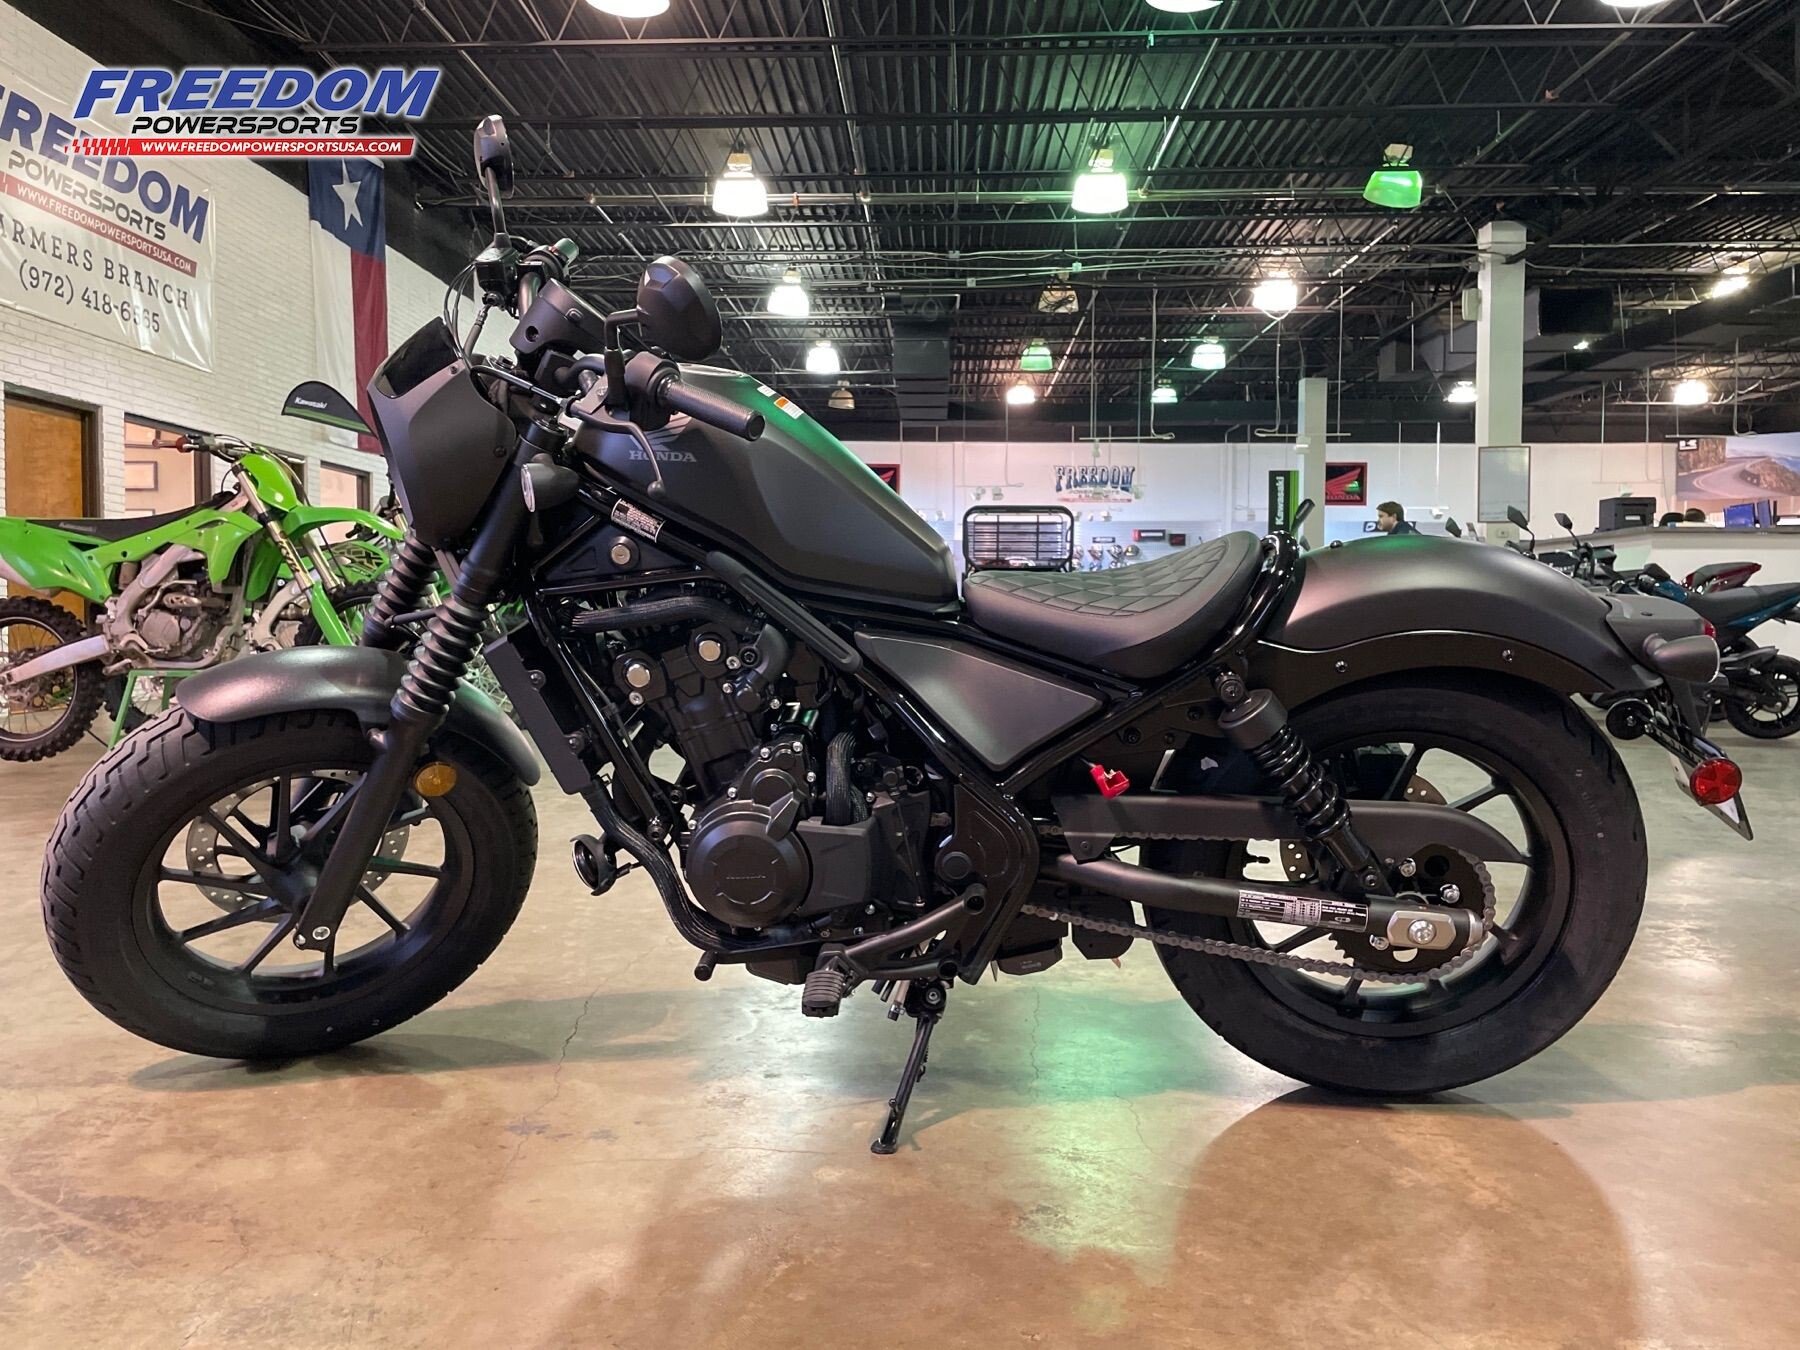 2021 Honda Rebel 500 Special Edition ABS for sale near Farmers Branch ...